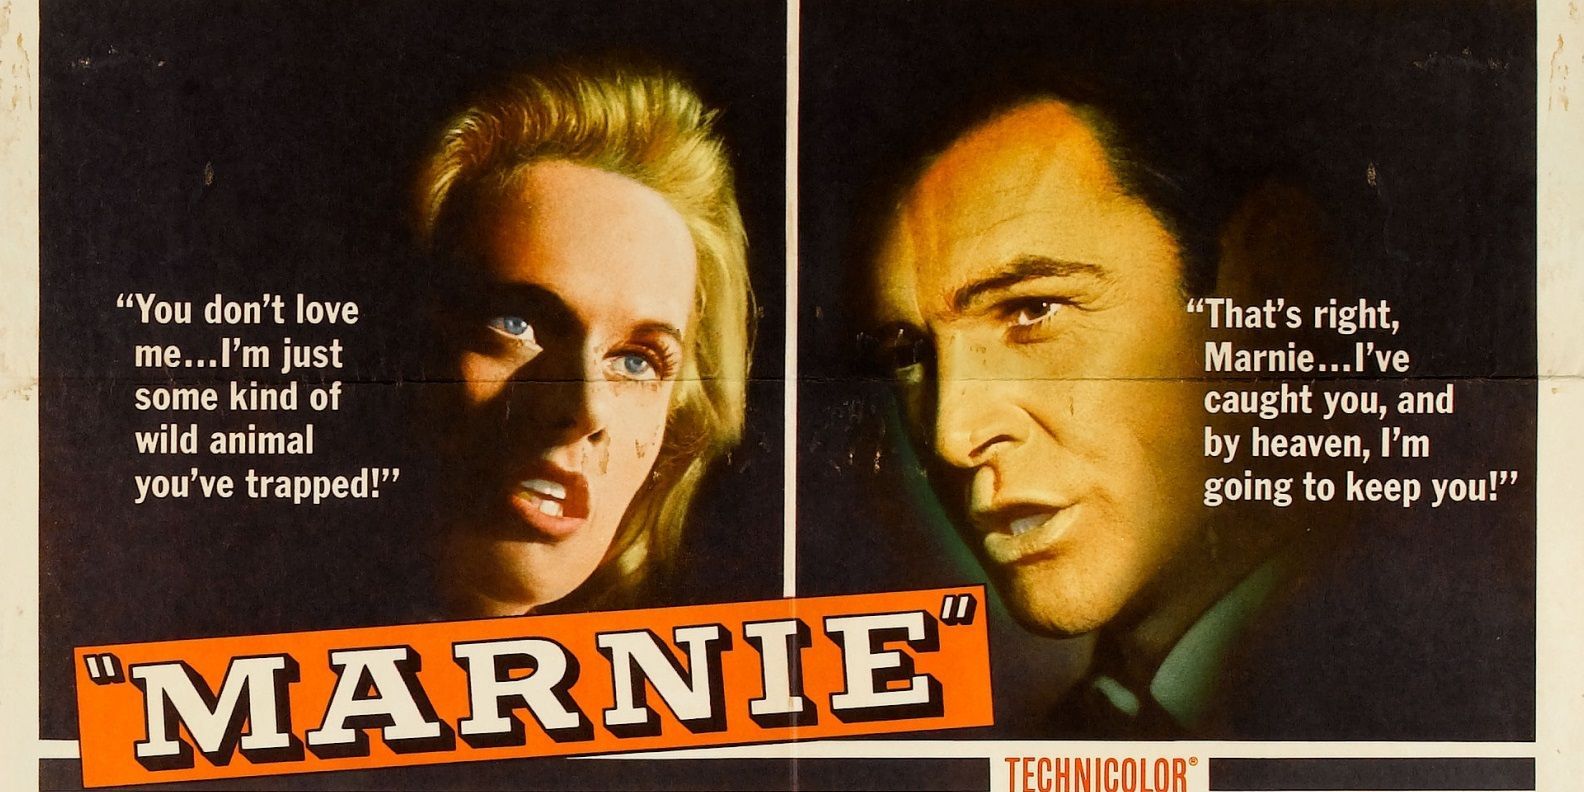 An image from the Marnie movie poster featuring Tippi Hedren and Sean Connery